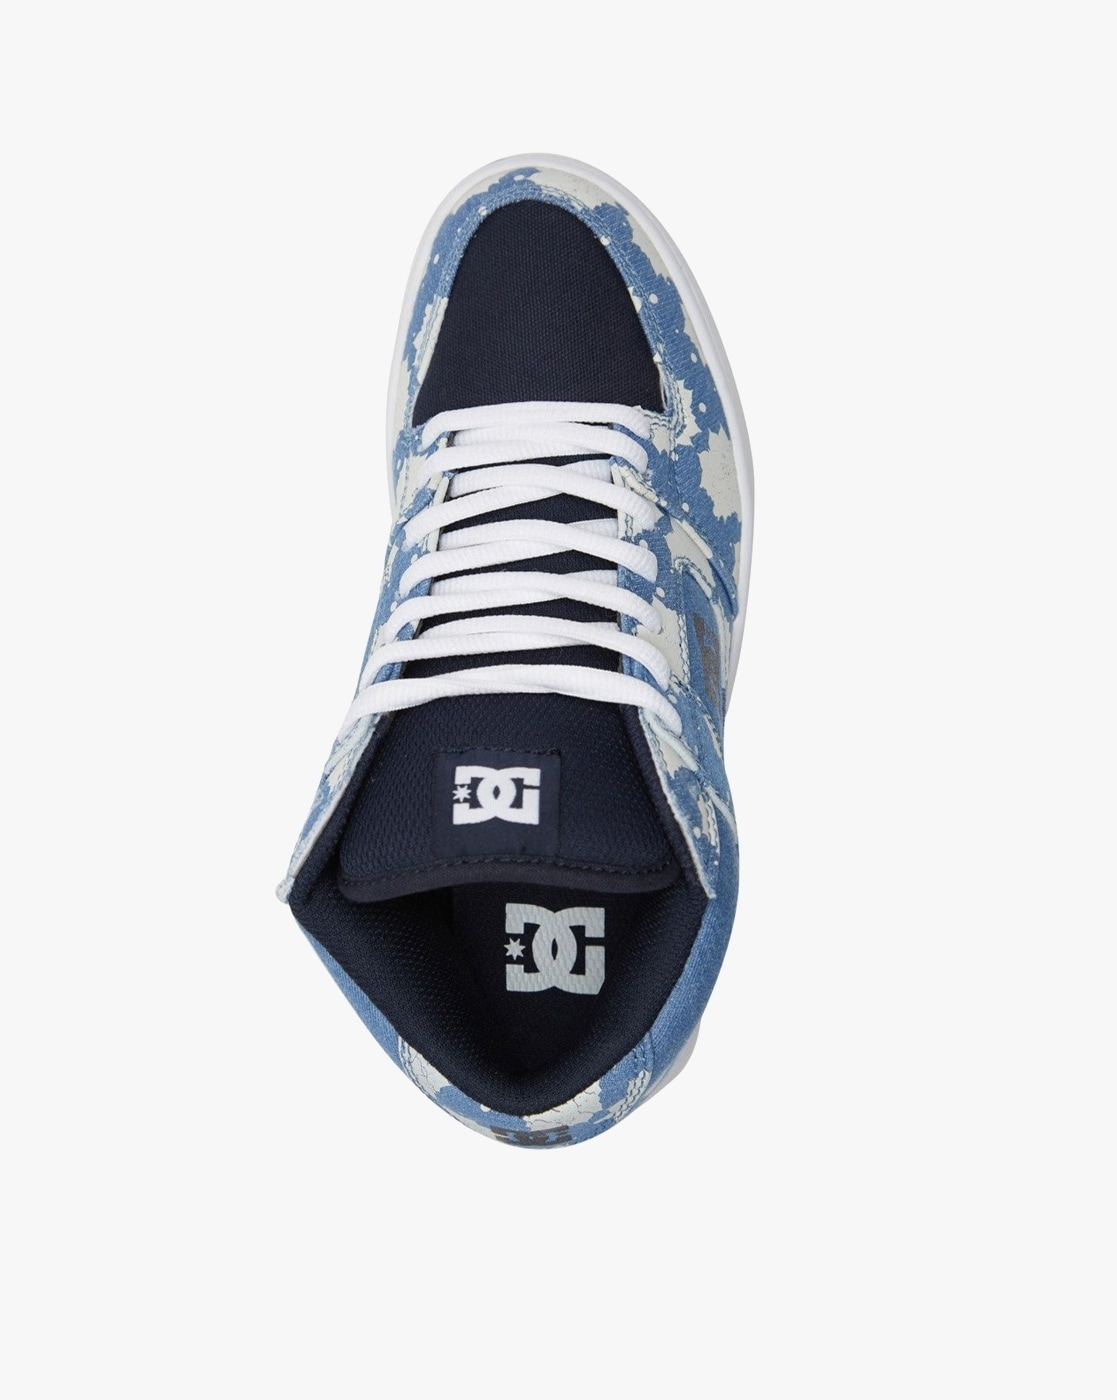 DC Shoes | Updates, Reviews, Prices